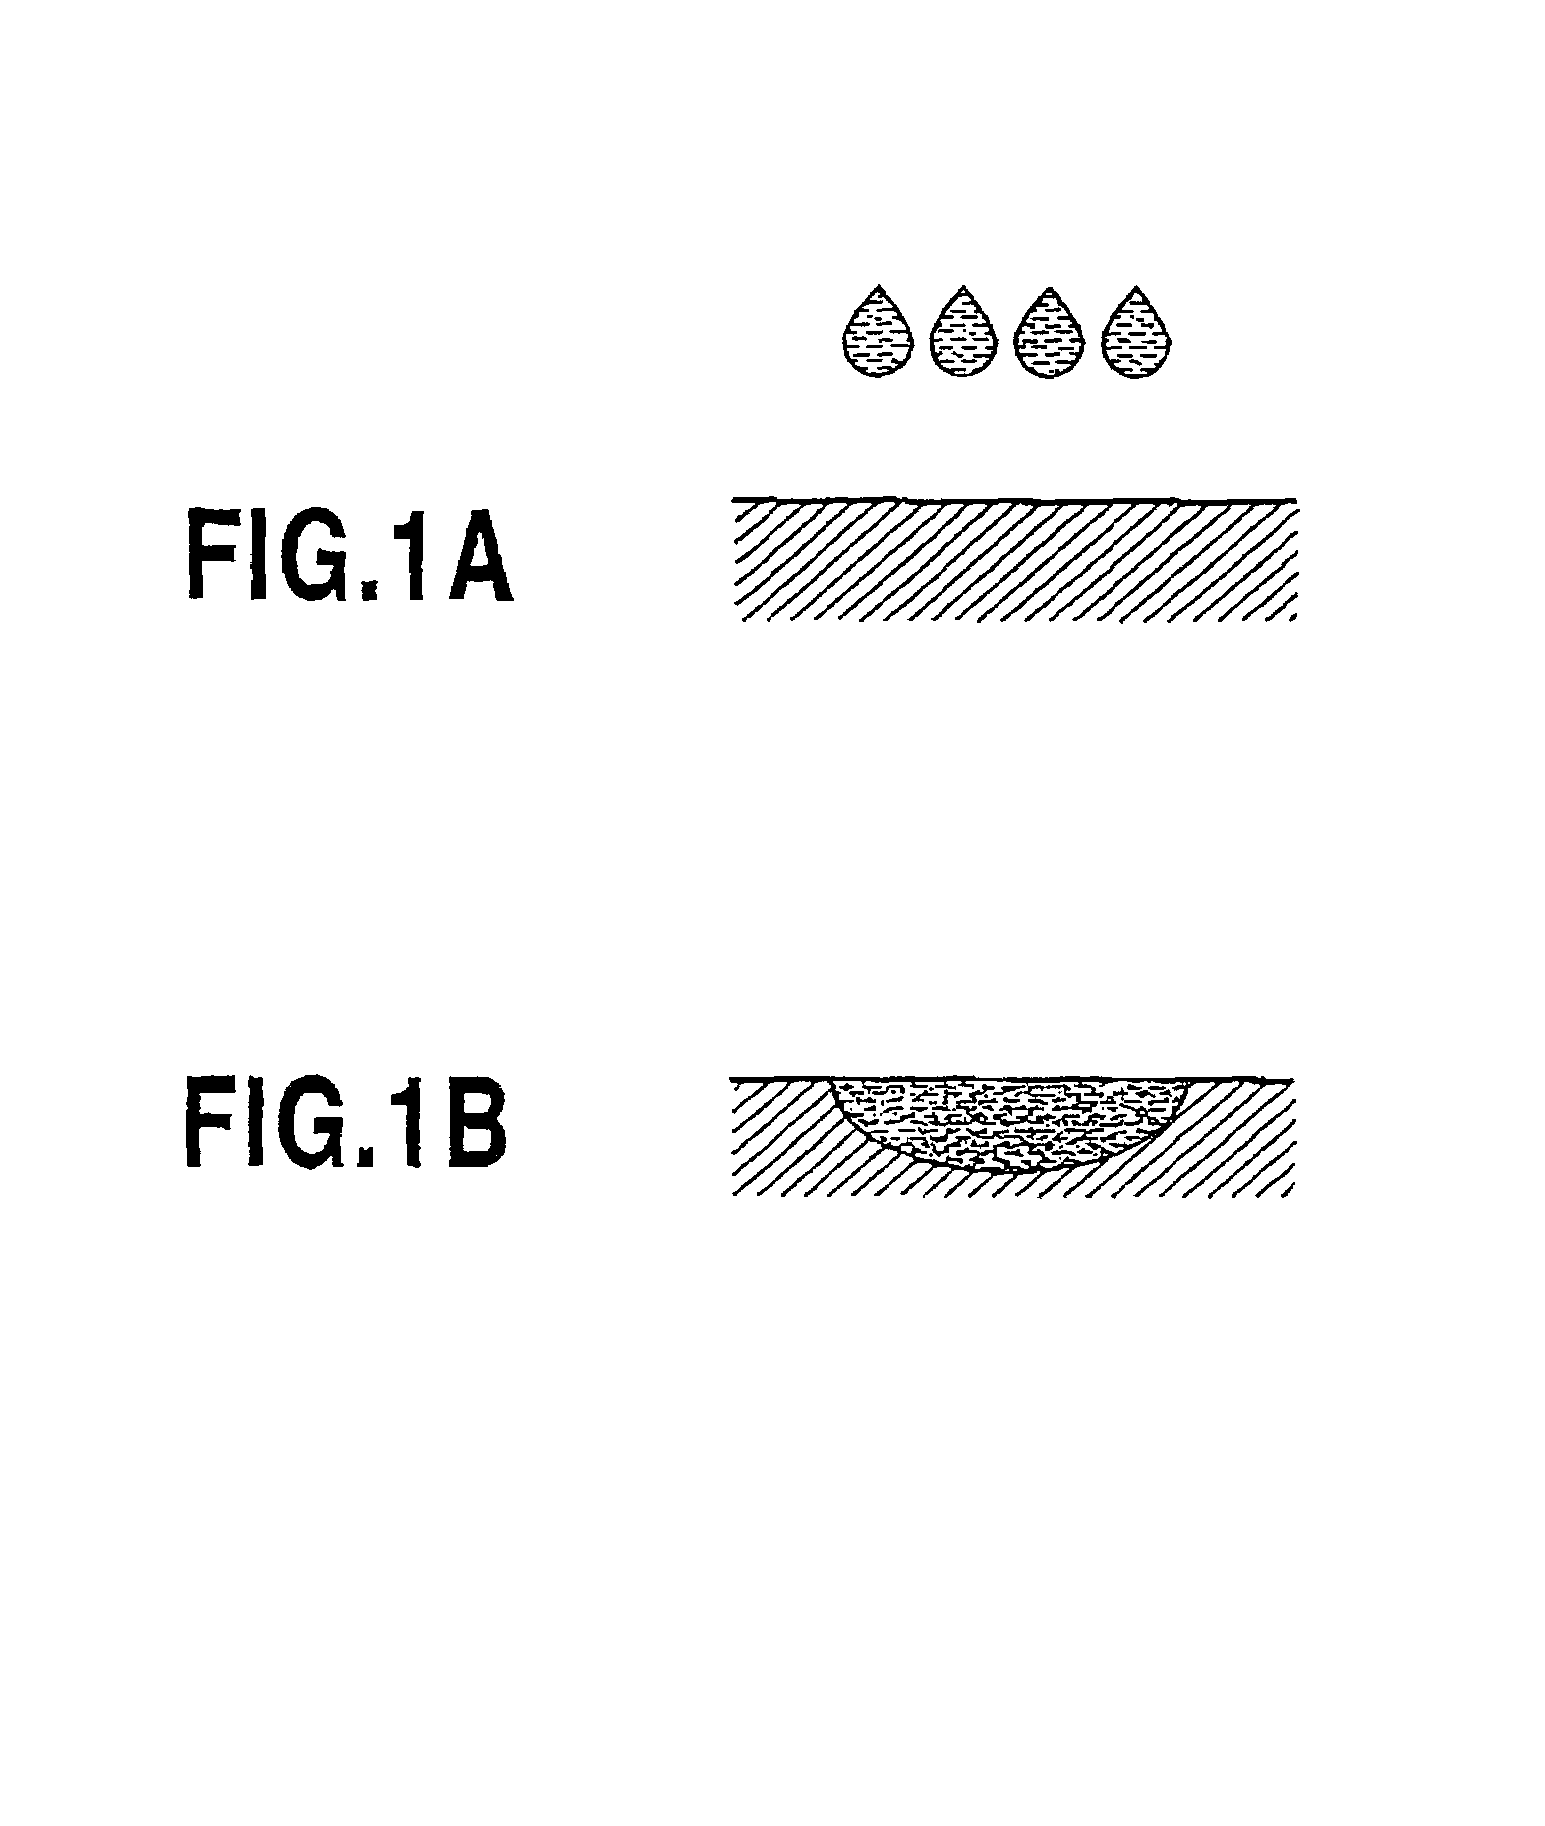 Ink jet printing with switched use of particular color ink depending on number of print head passes corresponding to print quality and speed